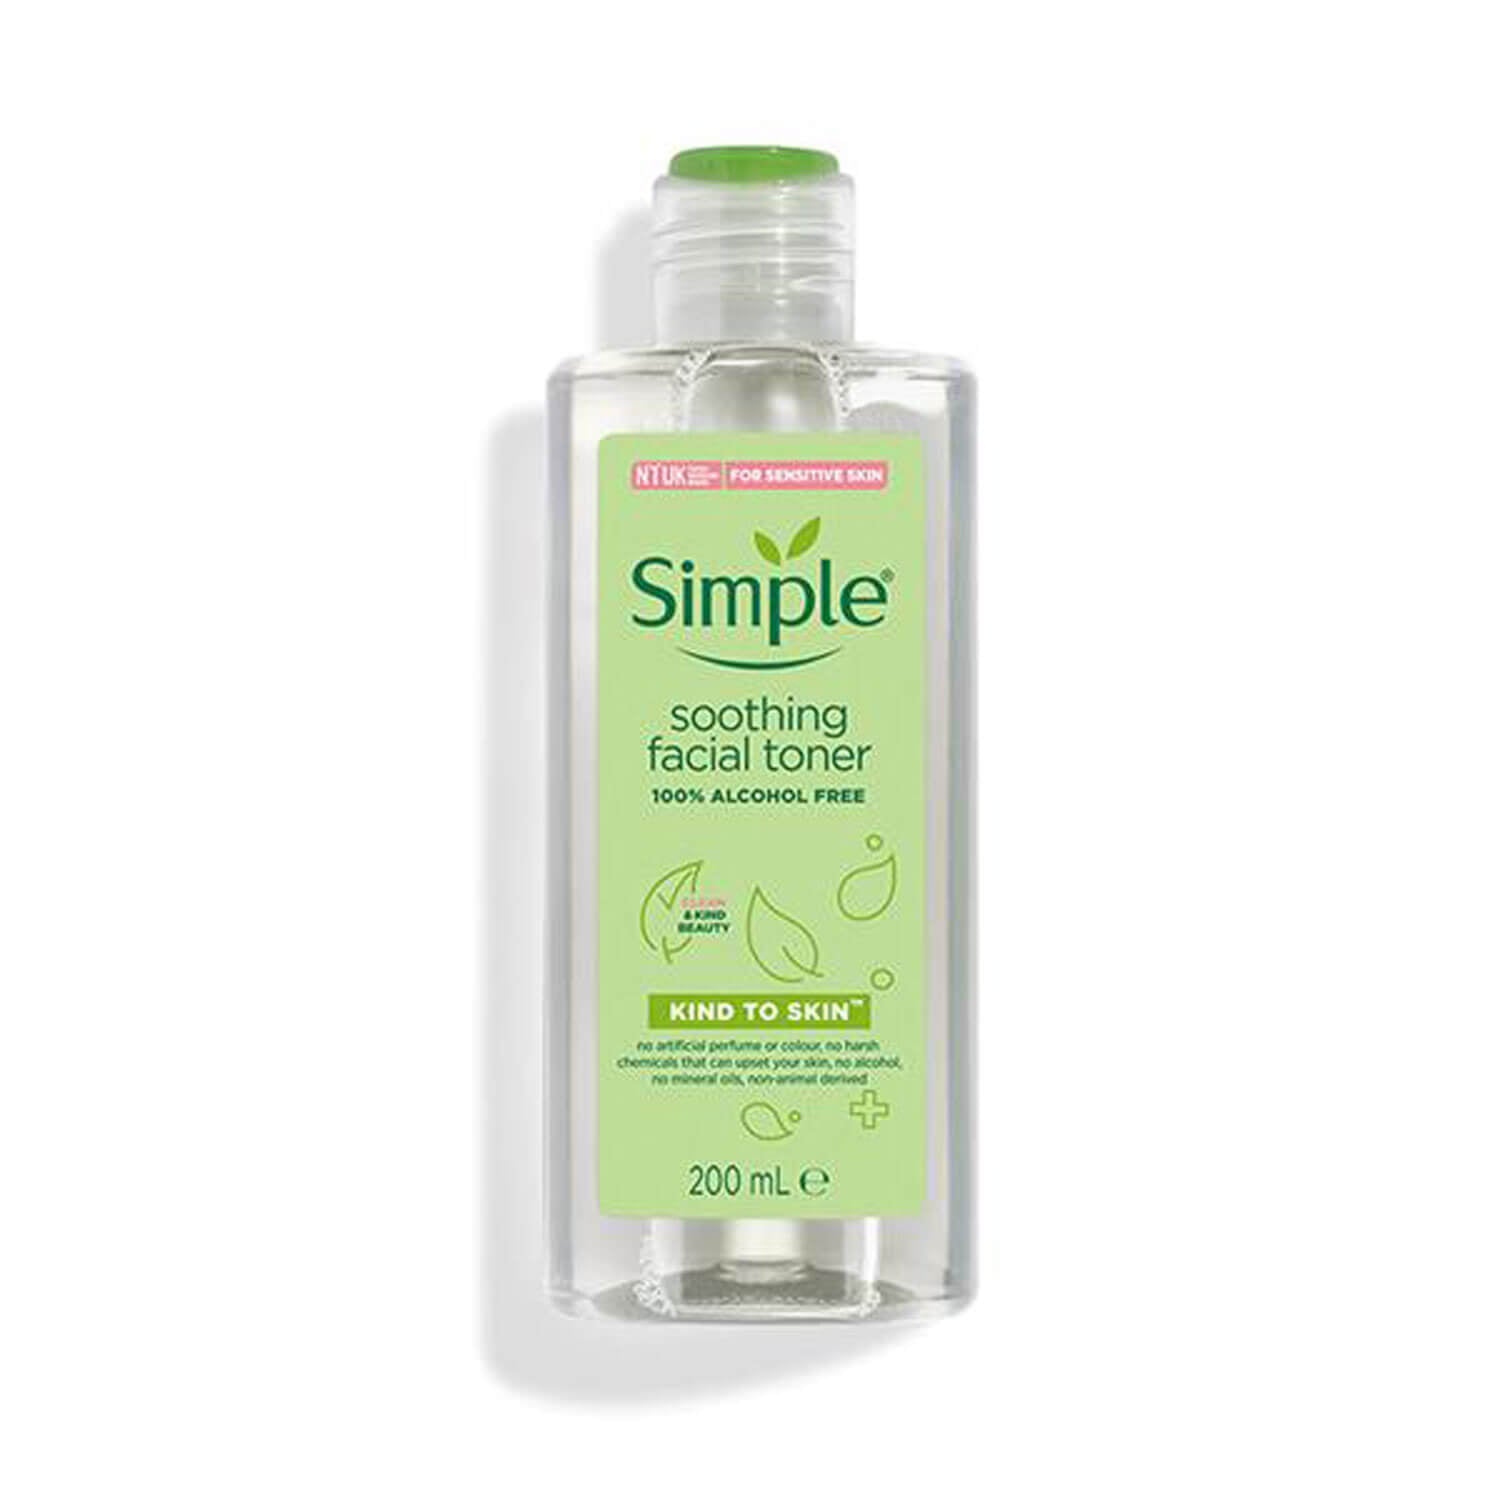 Simple Soothing Facial Toner 200ml 1 Shaws Department Stores